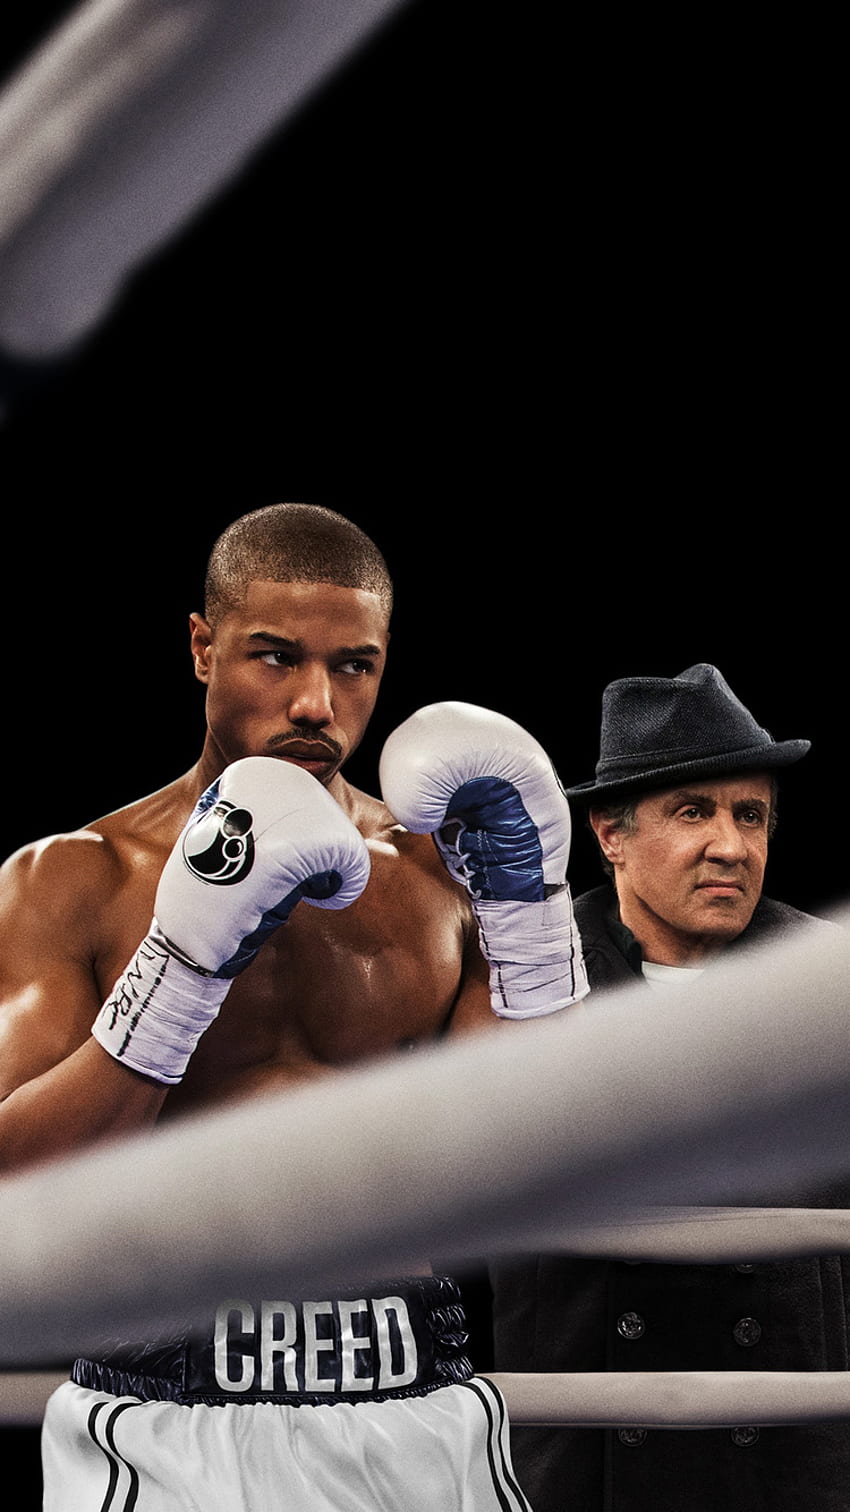 Michael B Jordan And Sylvester Stallone In Creed iPhone 6, iPhone 6S, iPhone 7 , , 背景, そして, アドニス クリード HD電話の壁紙